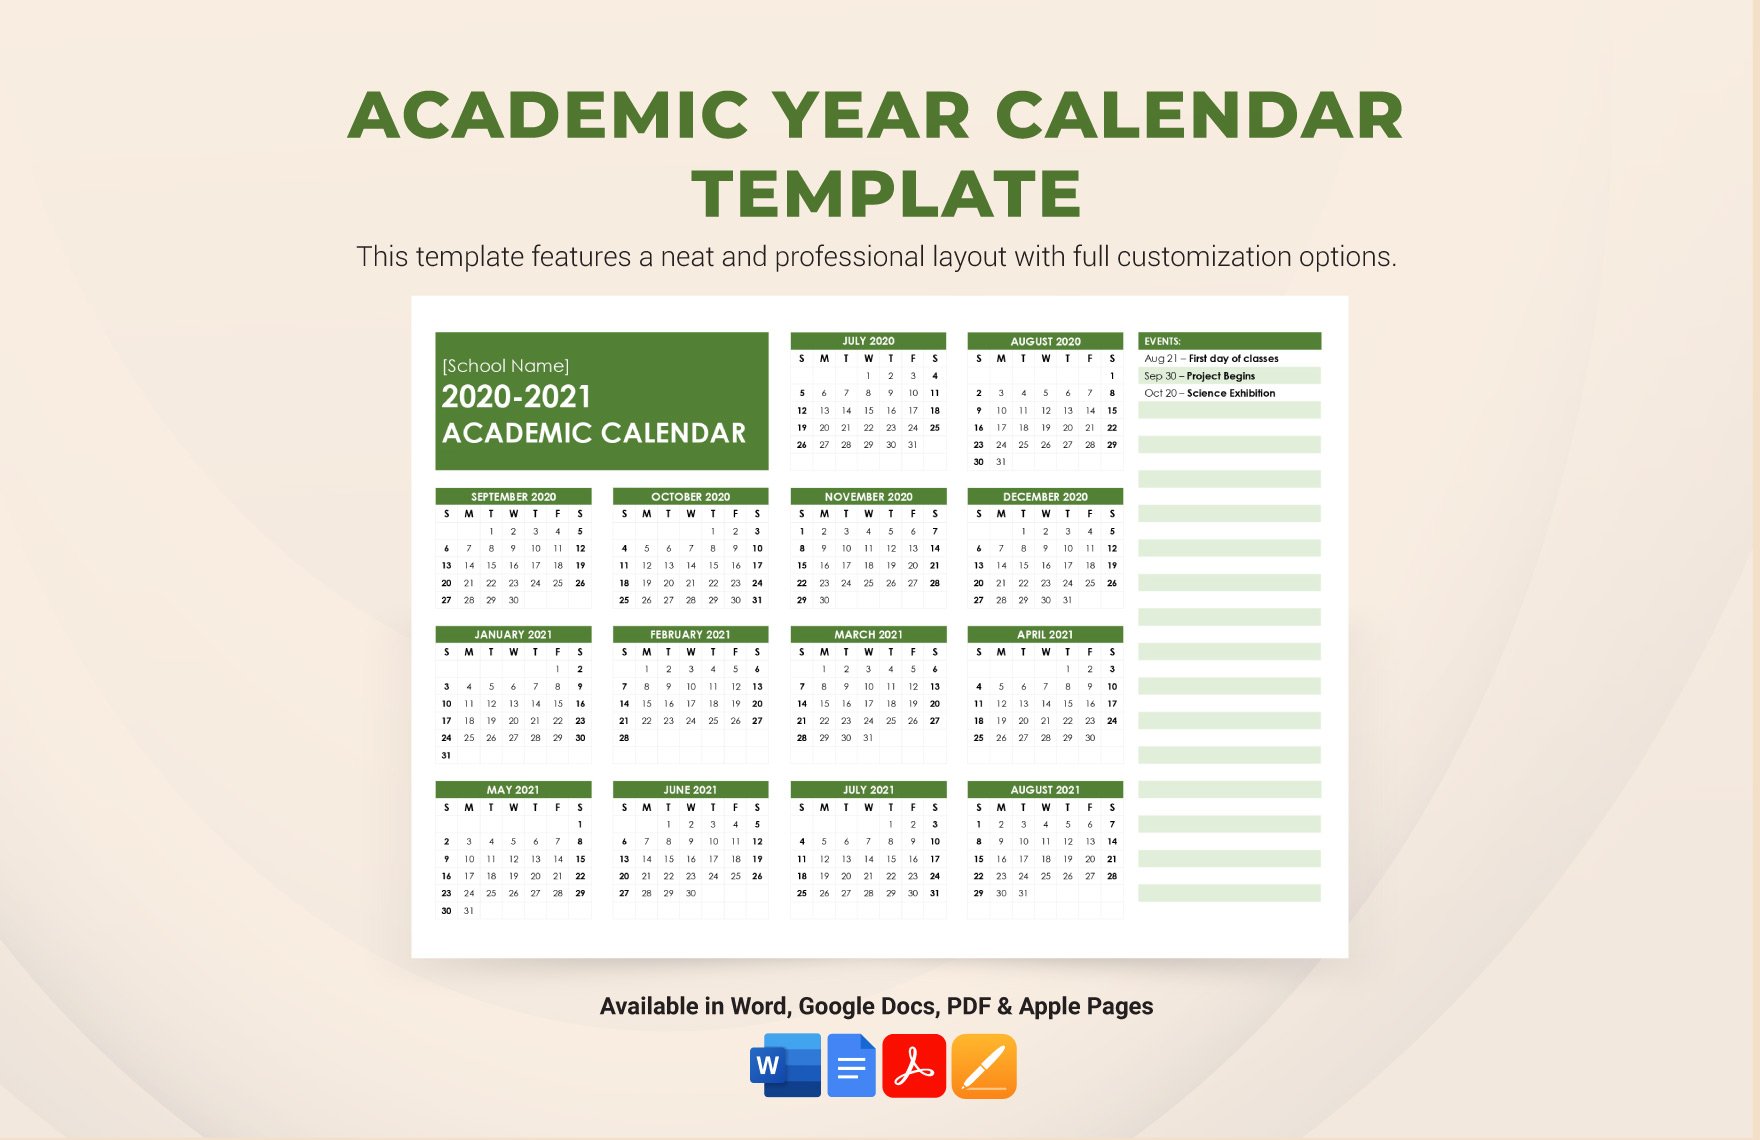 Academic Year Calendar Template in Word, Google Docs, PDF, Apple Pages